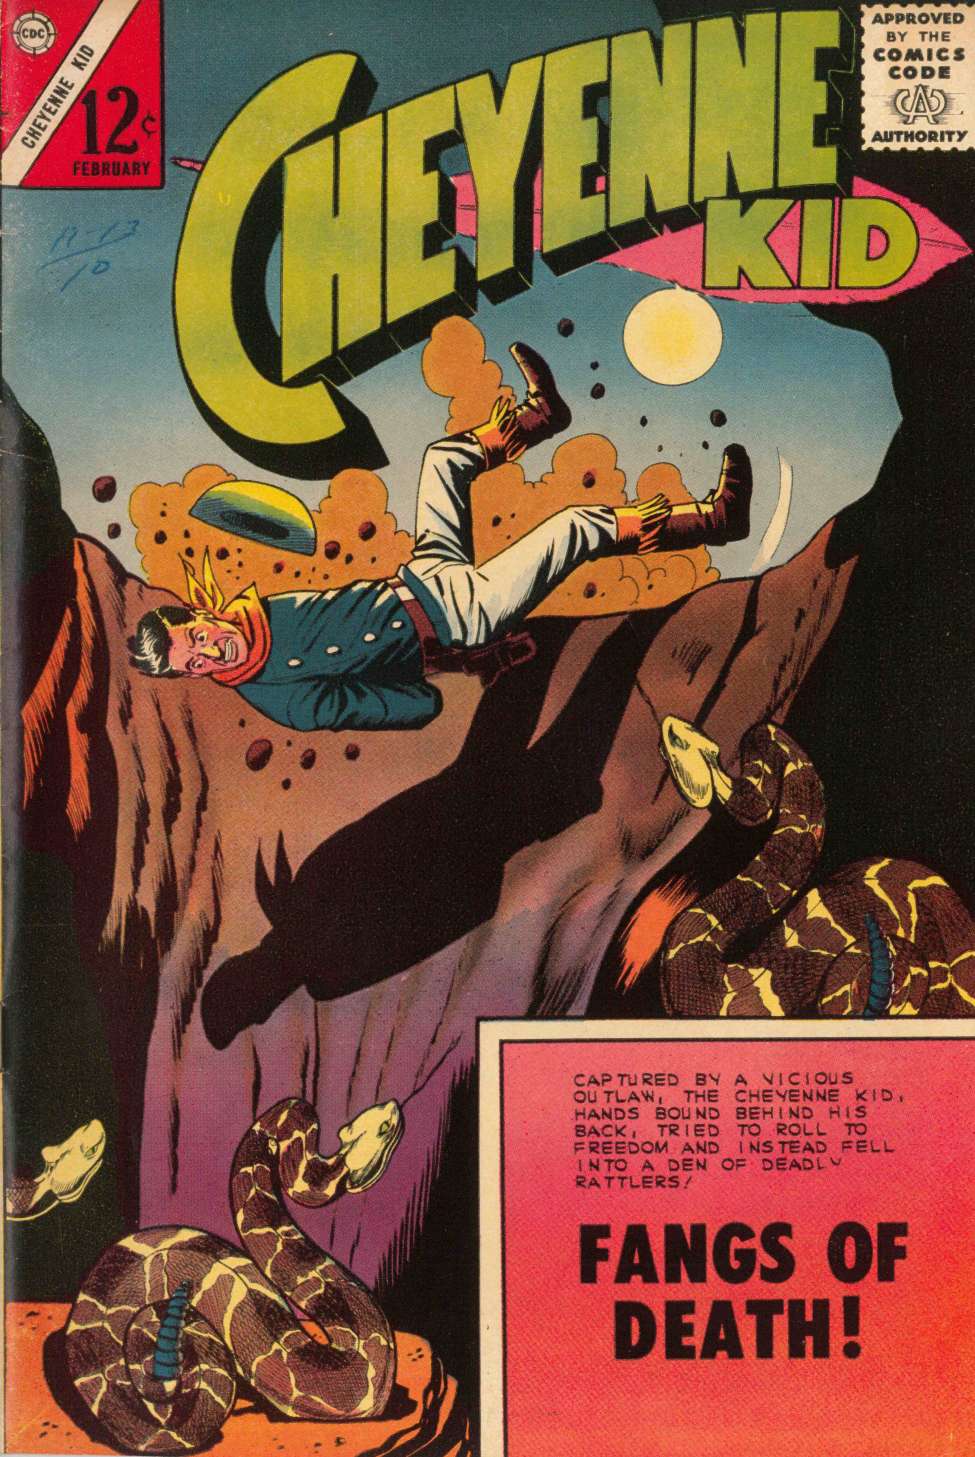 Book Cover For Cheyenne Kid 38